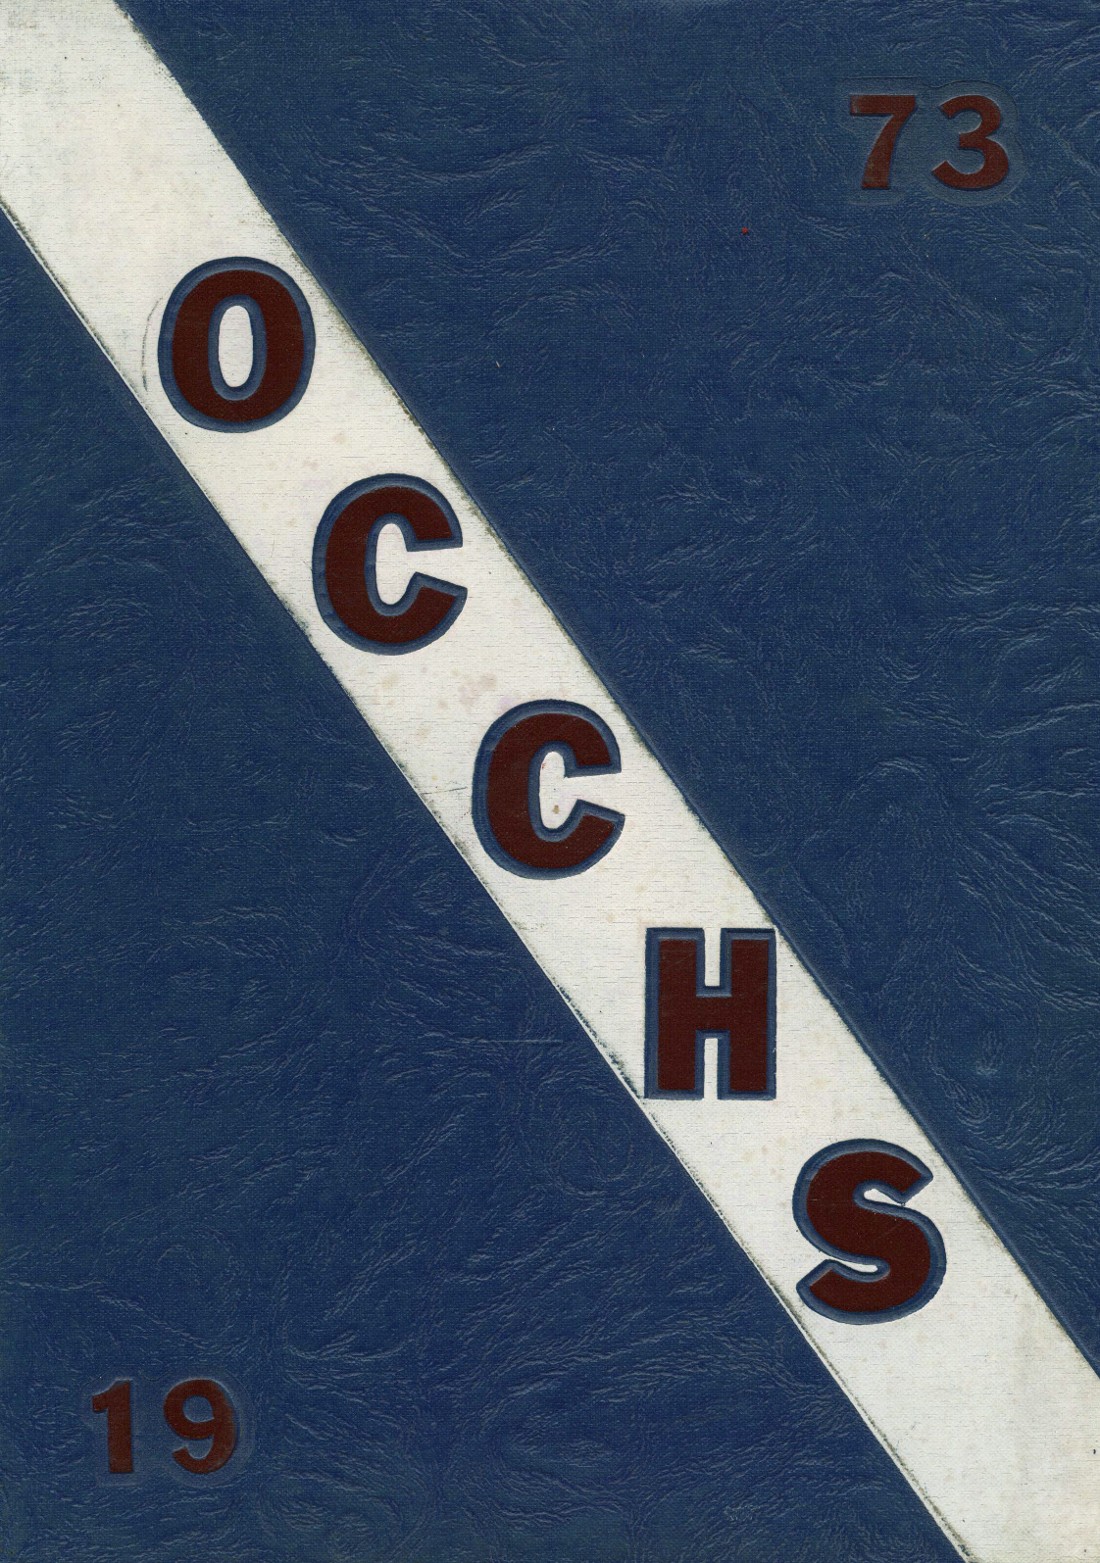 1973 yearbook from Obion County Central High School from Troy, Tennessee